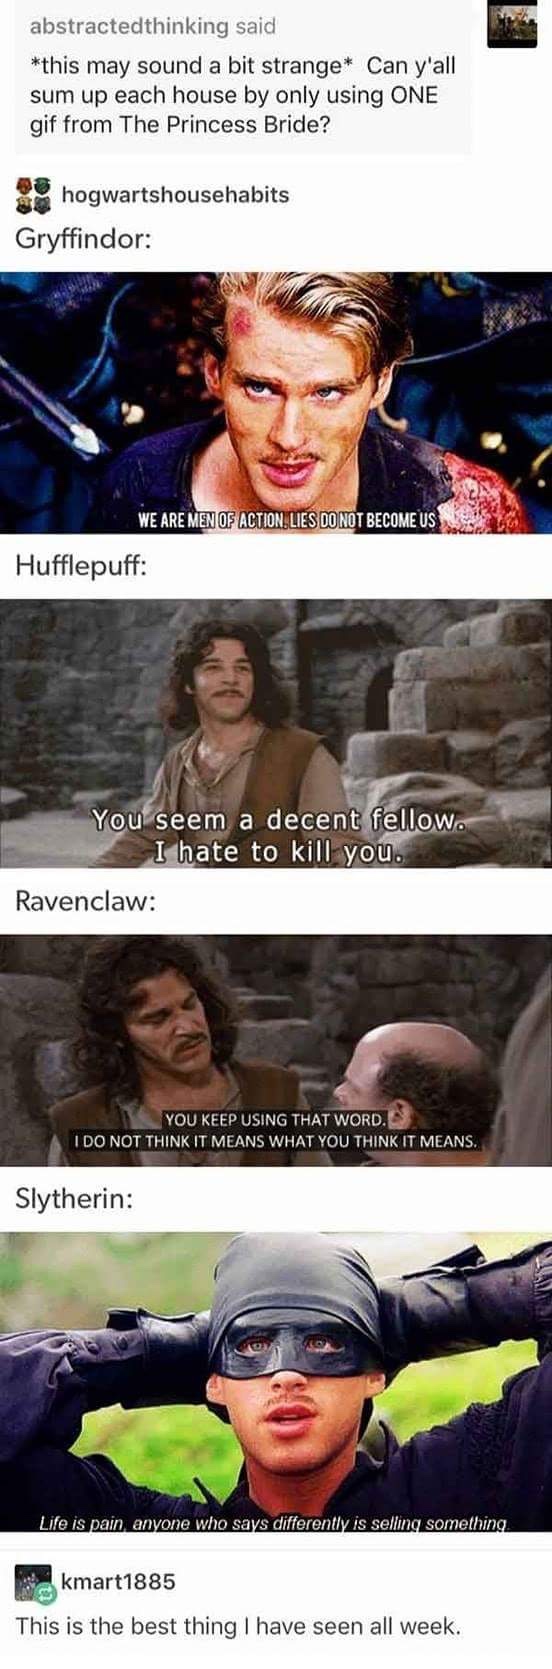 hogwarts houses as princess bride quotes - abstracted thinking said this may sound a bit strange Can y'all sum up each house by only using One gif from The Princess Bride? hogwartshousehabits Gryffindor We Are Men Of Action Lies Do Not Become Us | Hufflep